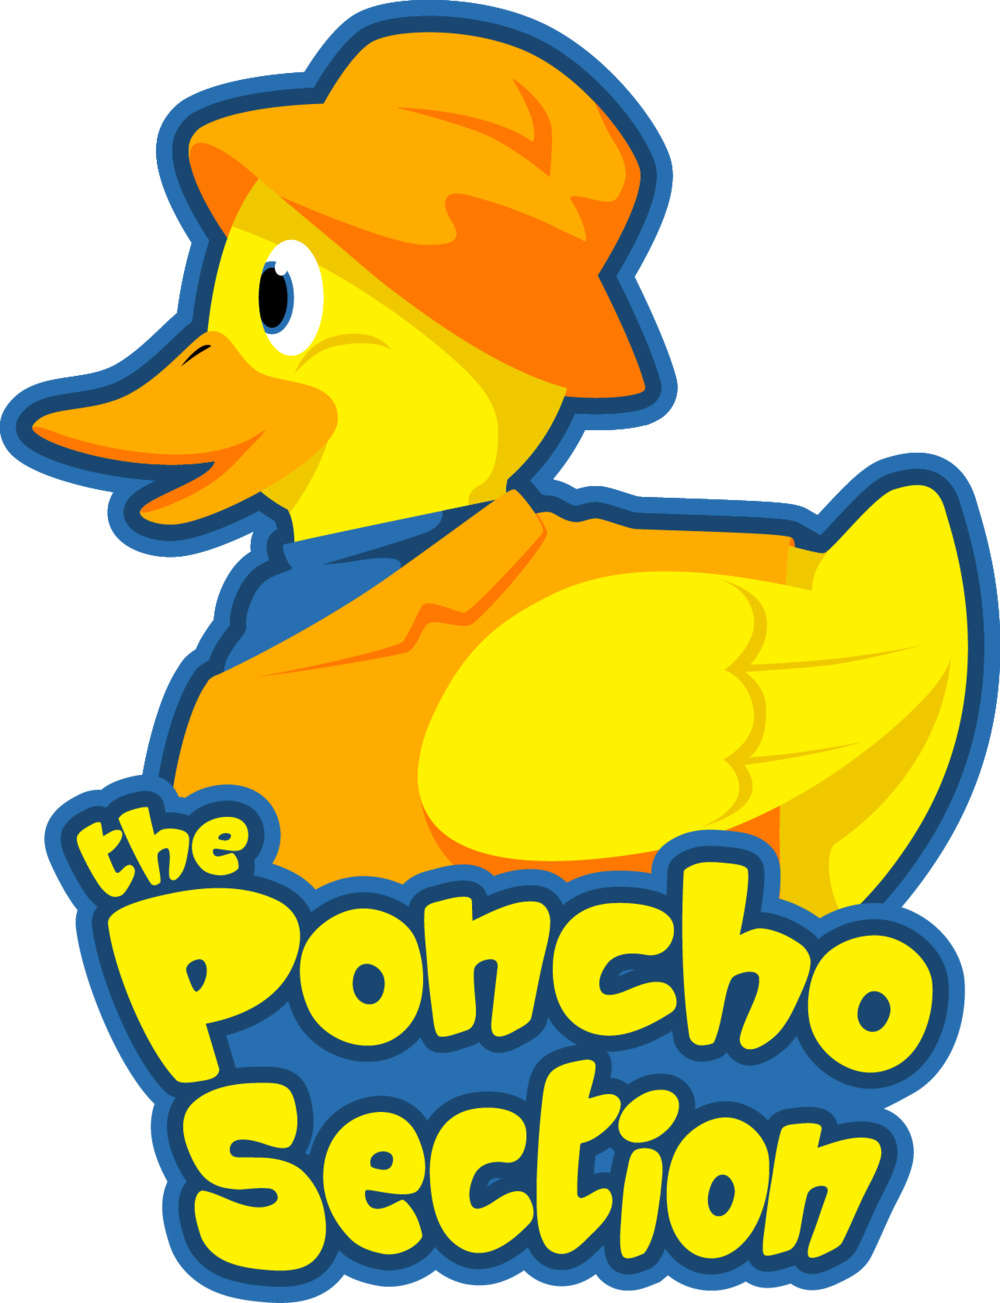 The poncho section mikeethanducklogovcombined. Ducks clipart yellow color